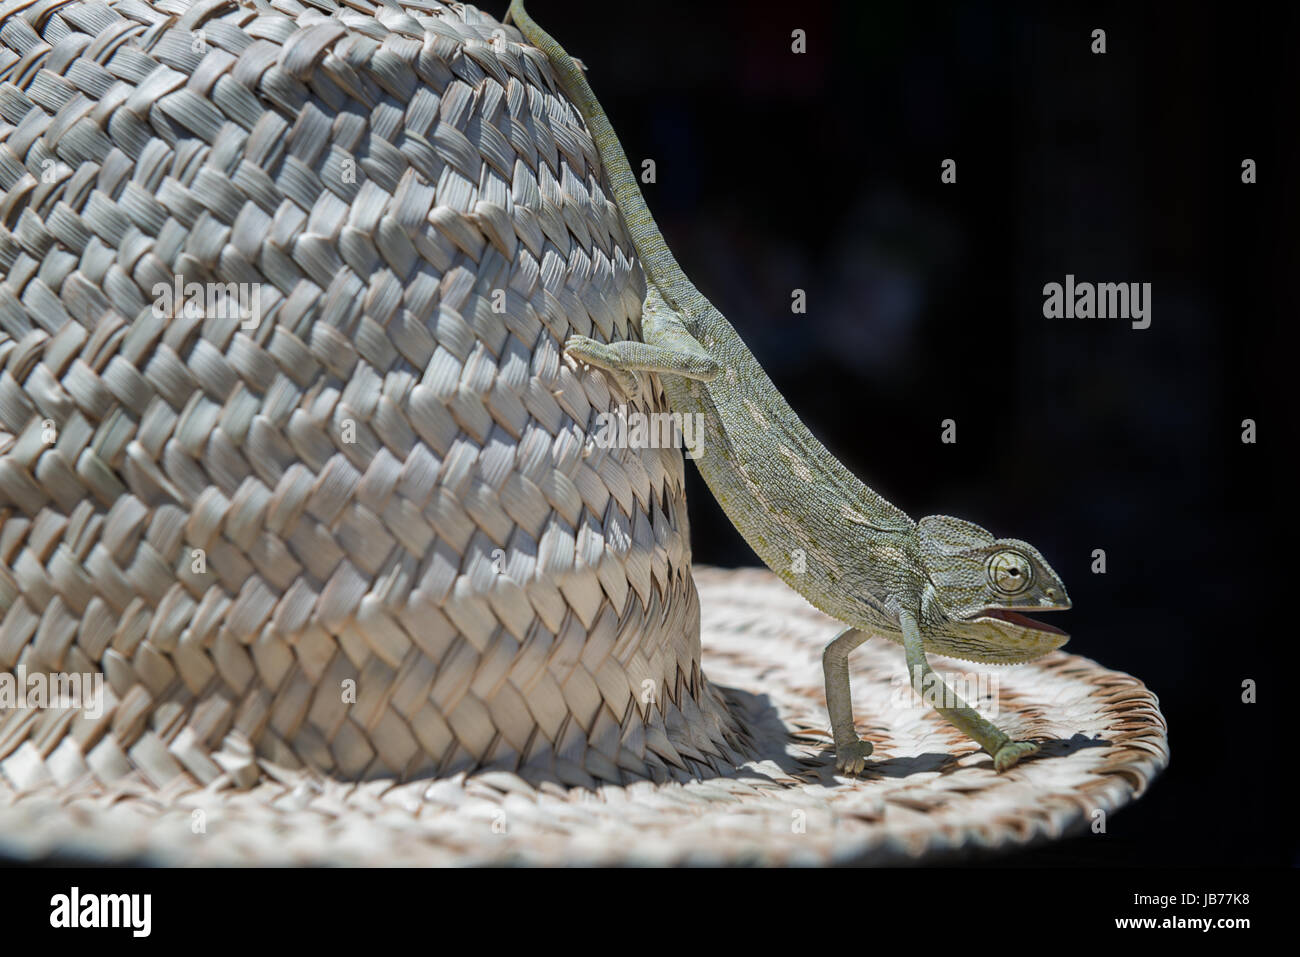 A chameleon on a straw hat. Stock Photo